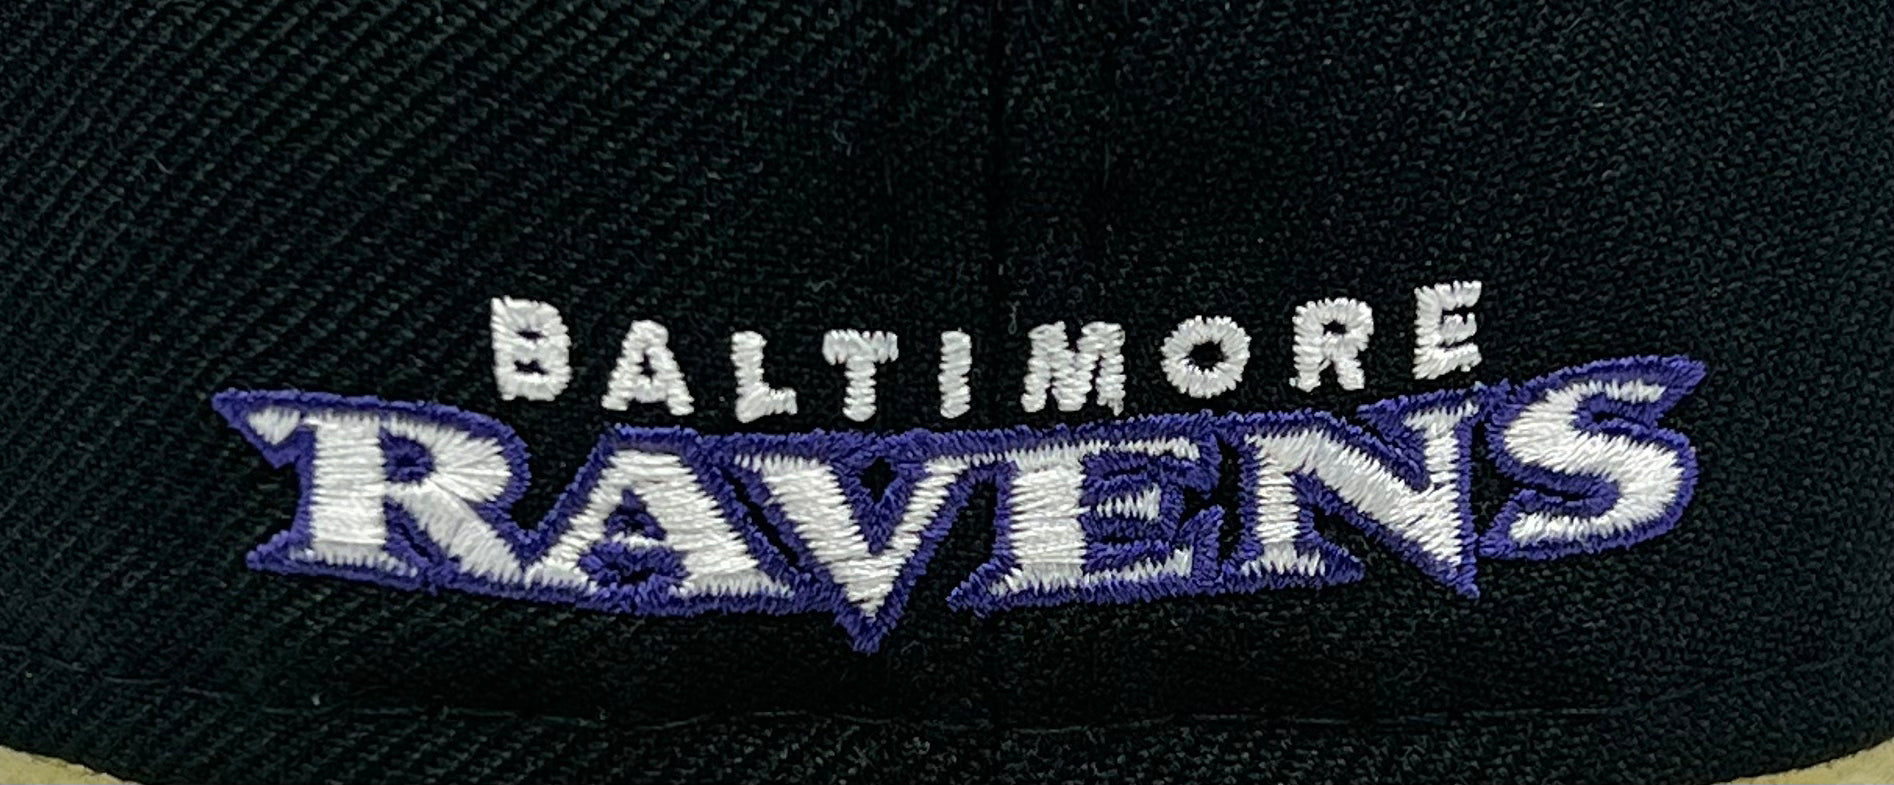 BALTIMORE RAVENS (BLK/PURPLE) NEW ERA 59FIFTY FITTED